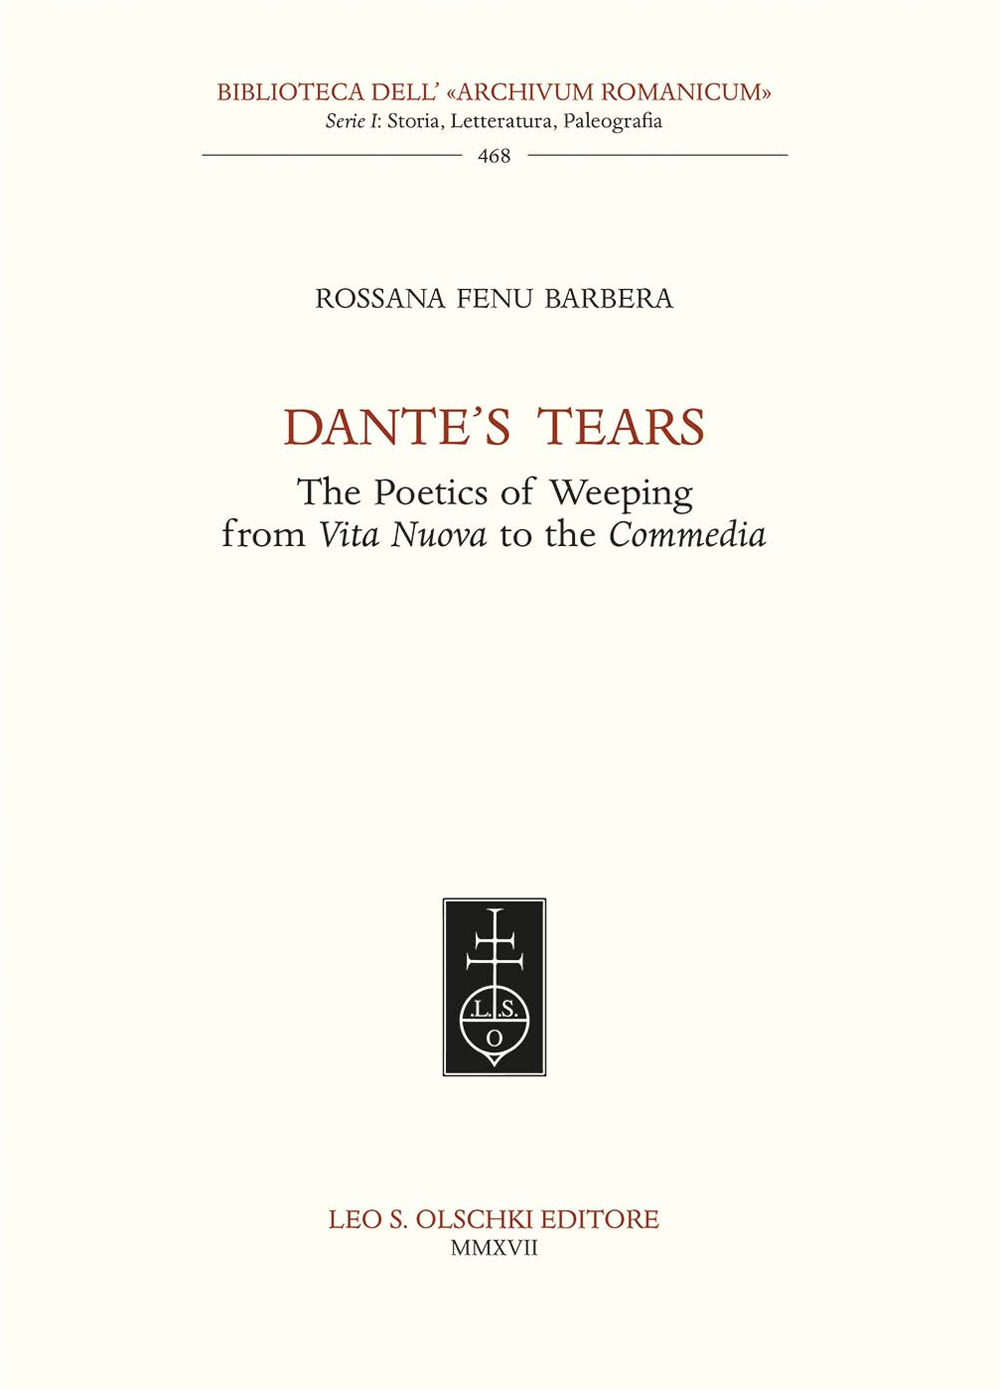 Dante's tears. The poetics of weeping from Vita Nuova to the Commedia